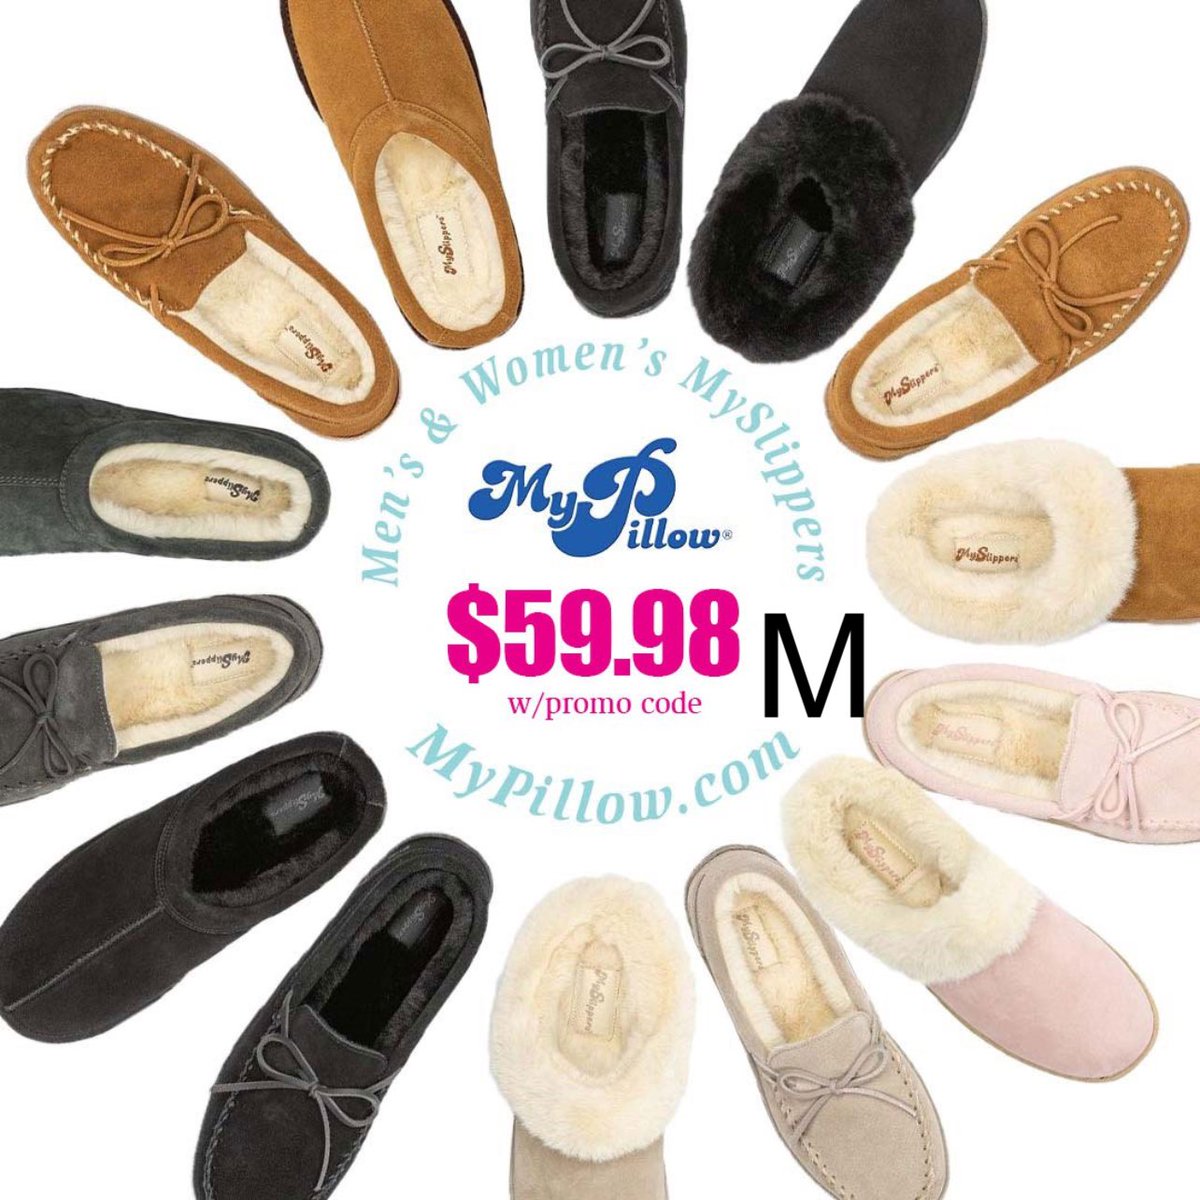 Step into comfort with #MyPillow’s MySlippers! For only $59.98 when you use promo code 👉M👈, you can treat your feet to the ultimate relaxation. Plus, enjoy free shipping on orders over $75! These slippers feel like a dream. Don't miss out on this amazing deal!…